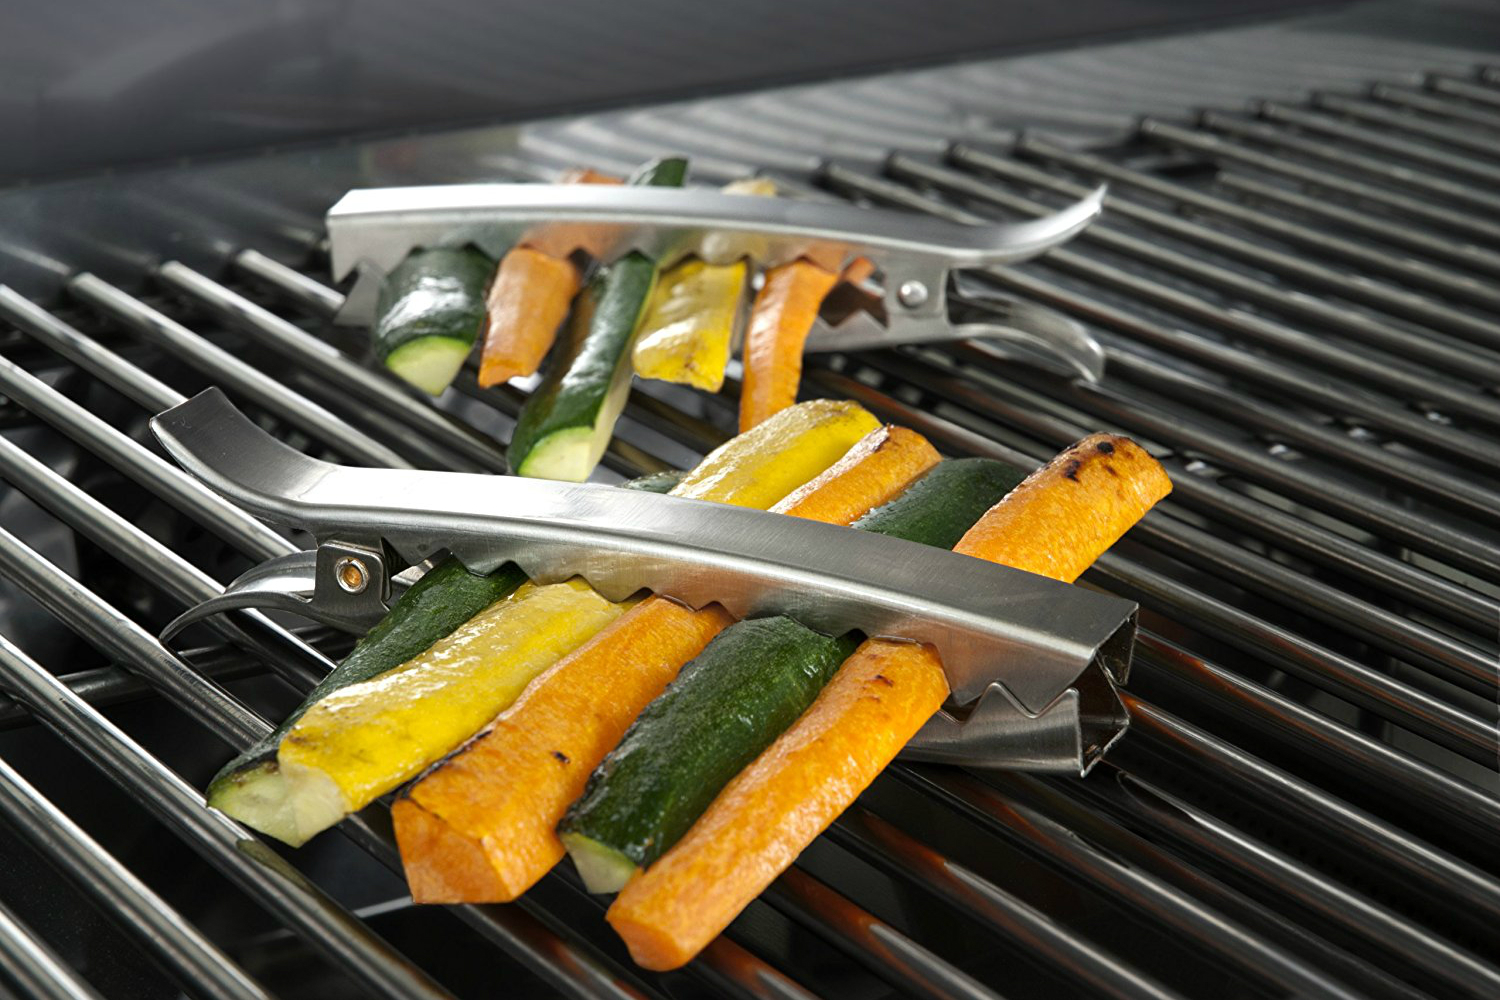 18 Coolest BBQ and Grilling Gadgets For 2020